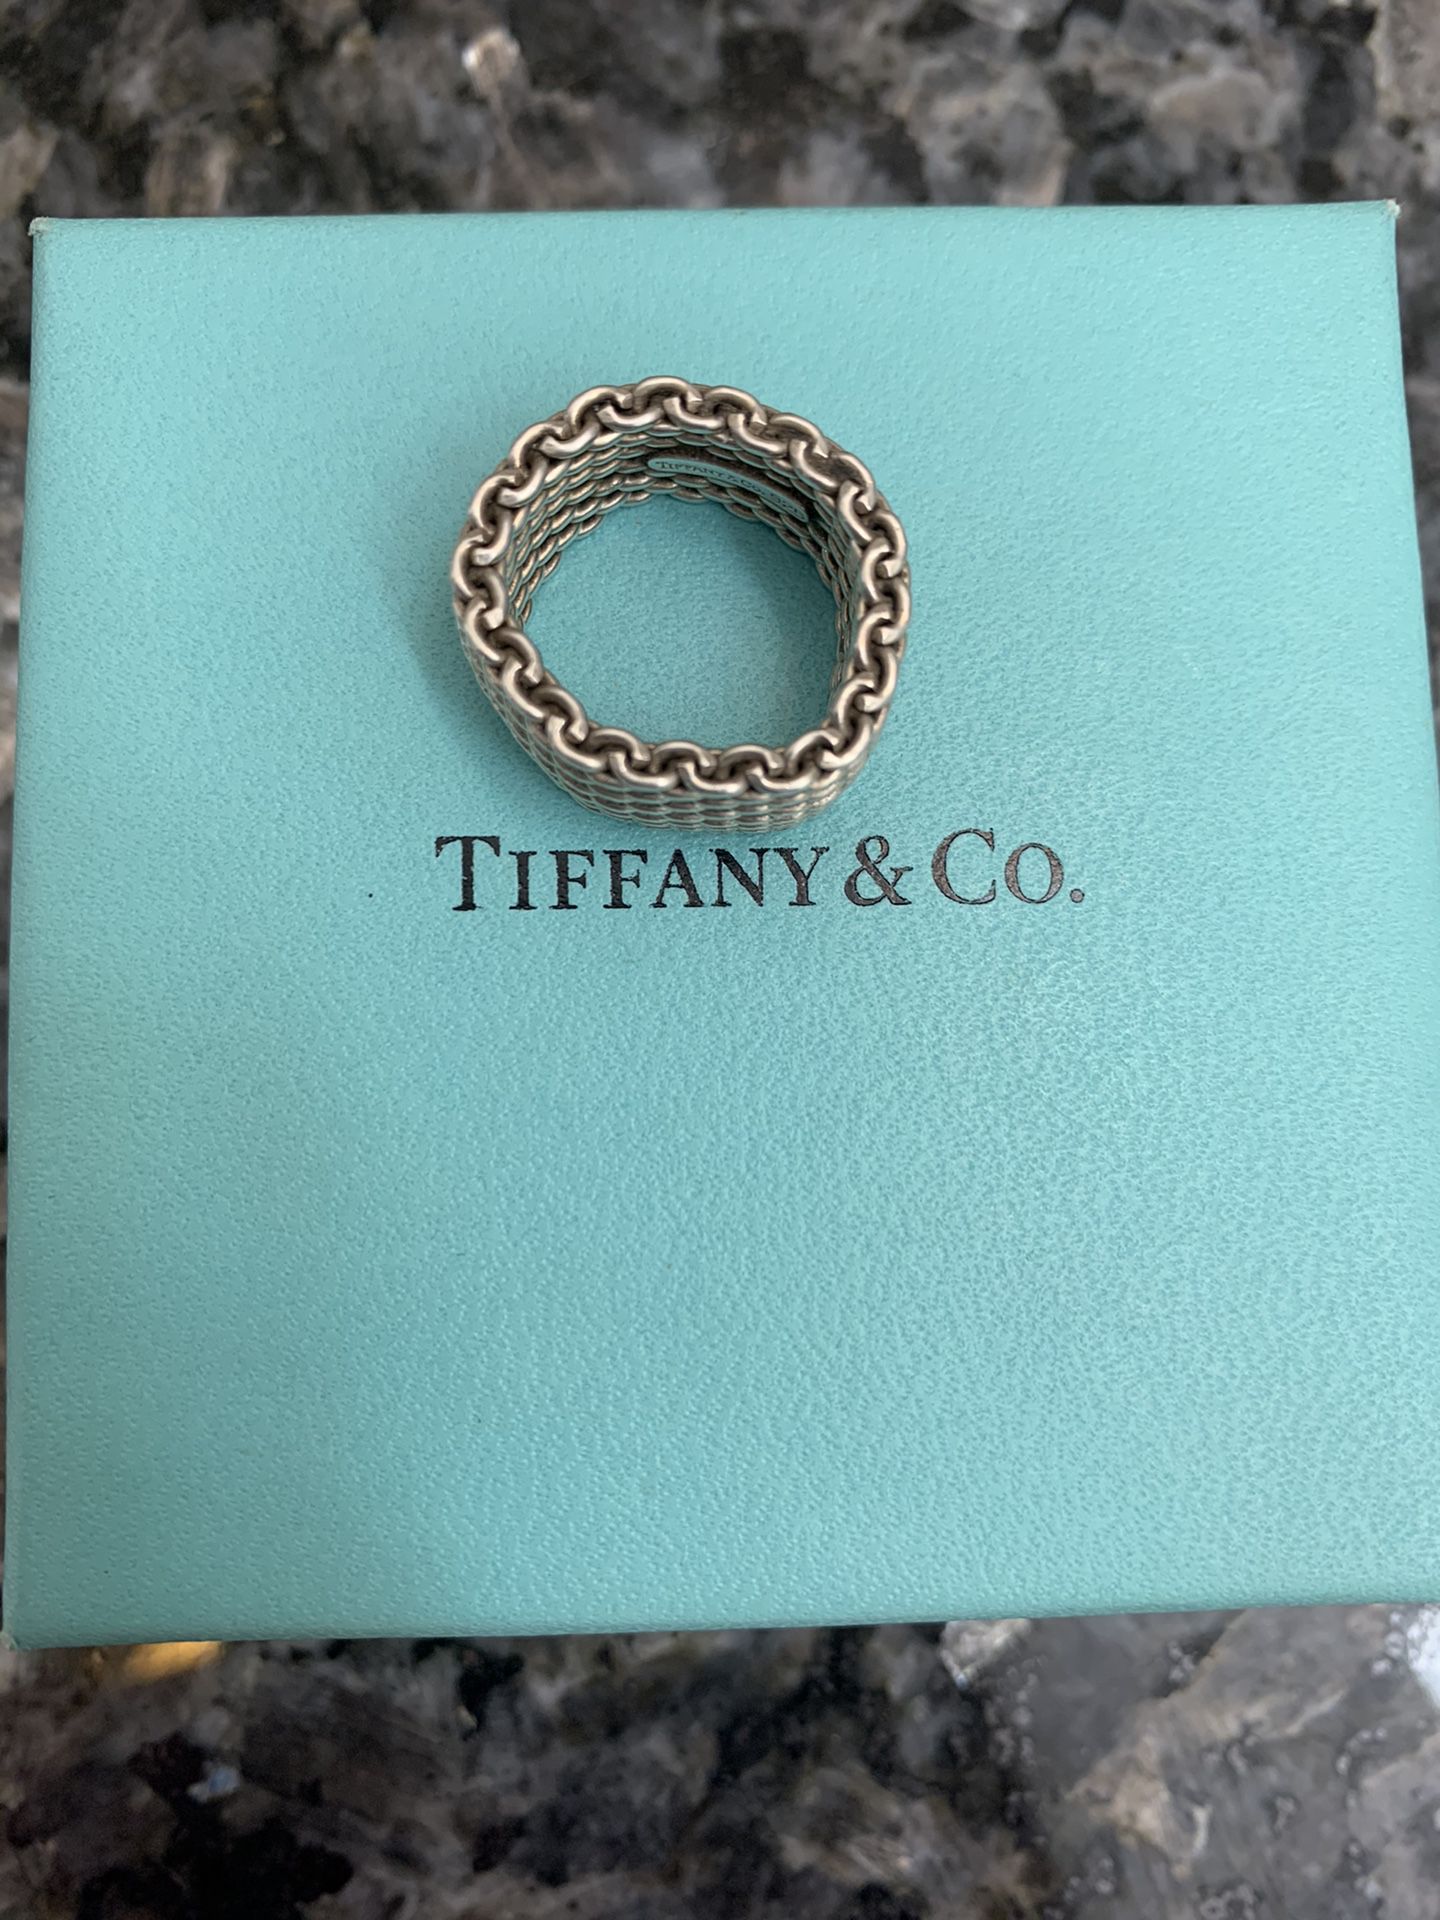 Tiffany & Co. Somerset wide mesh ring - size 5